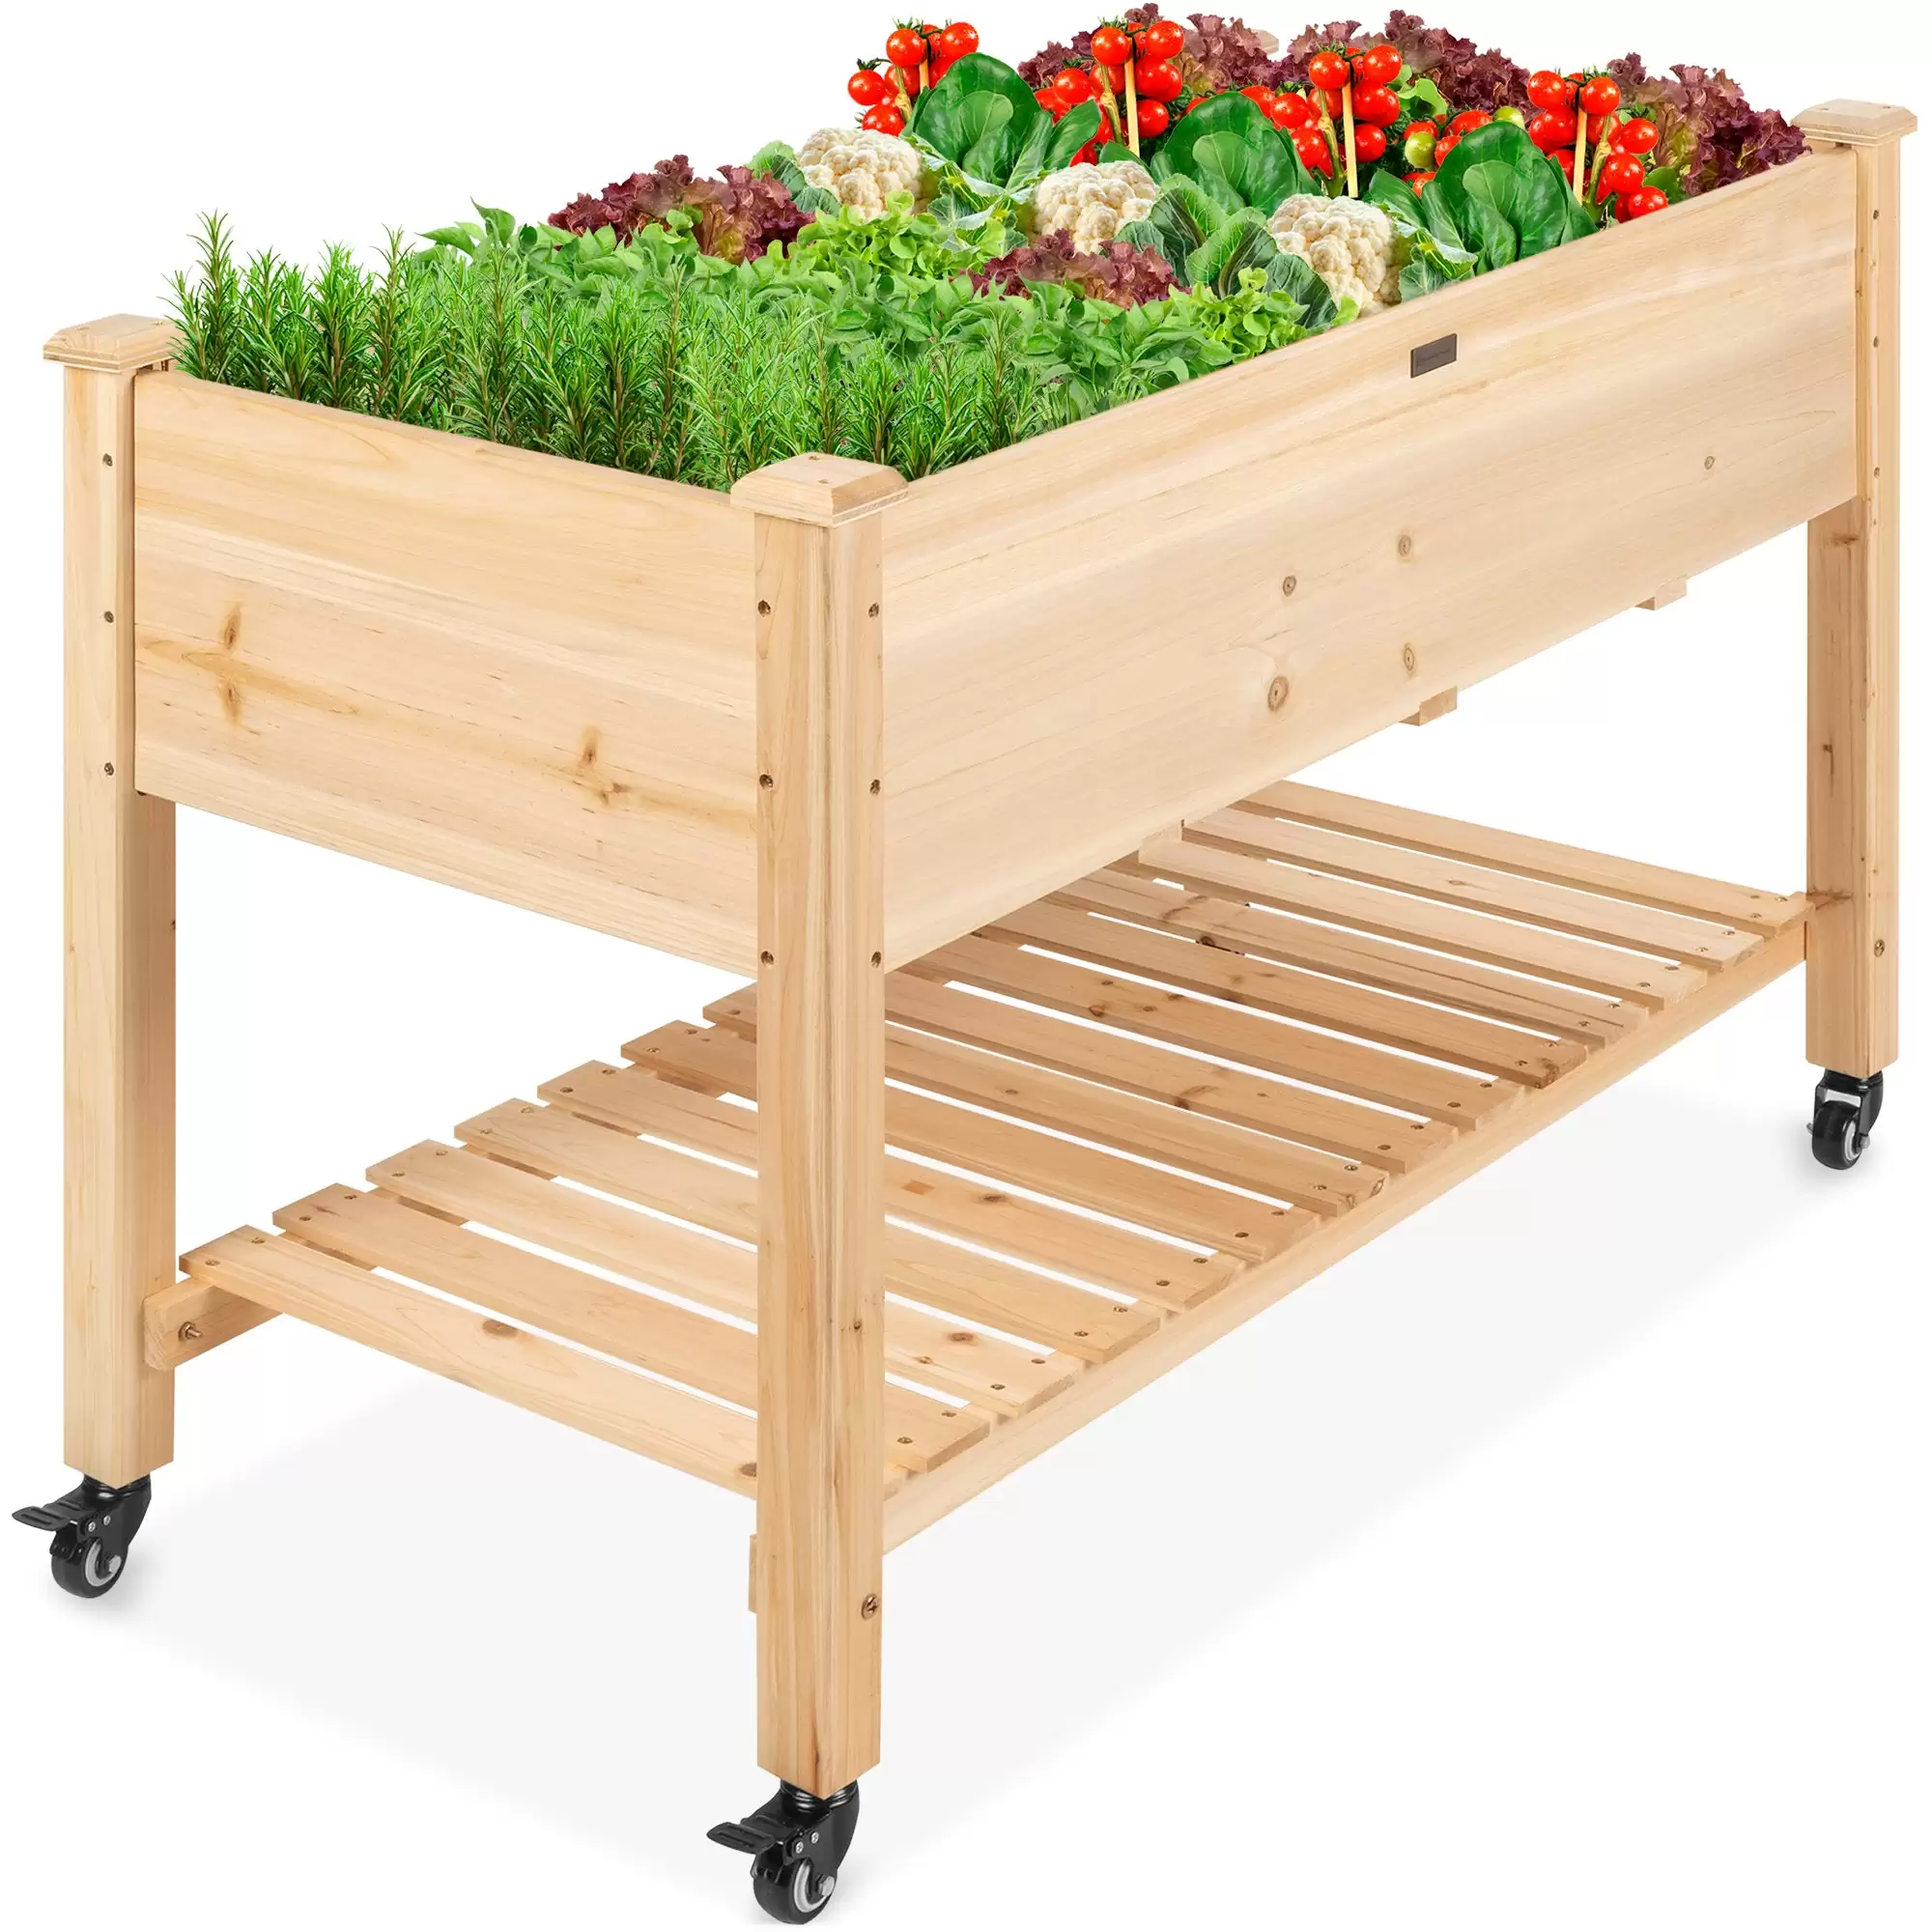 Starting At $90.07 Mobile Raised Garden Bed Elevated Planter W/ Wheels, Shelf At Bestchoiceproducts